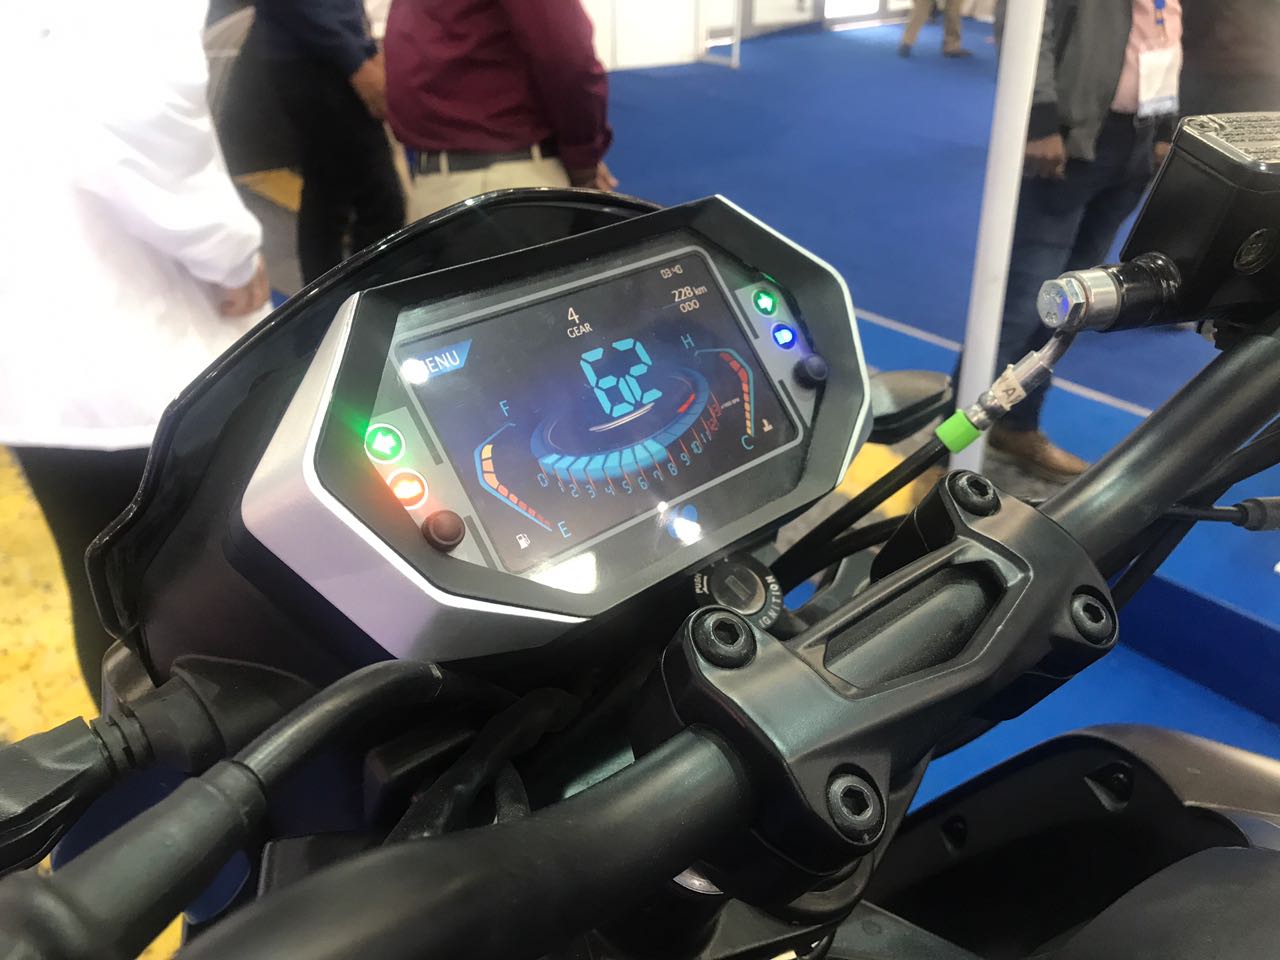 <p>TFT cluster (not production ready) that offers info on navigation, music, phone and also digital display of motorcycle info.</p>